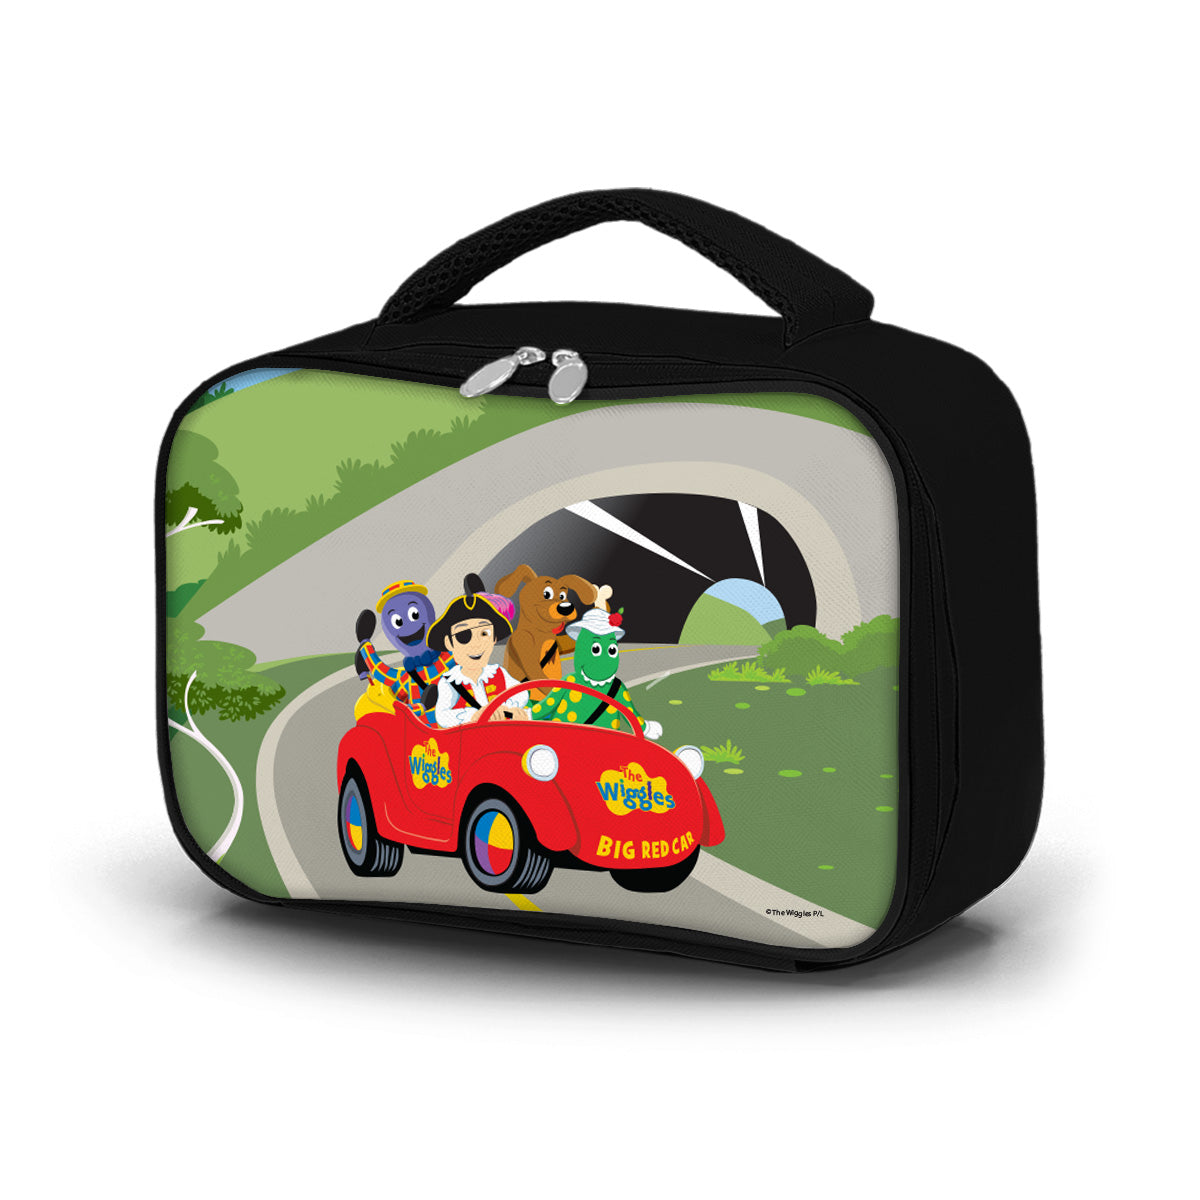 The Wiggles Travelling Lunch Cooler